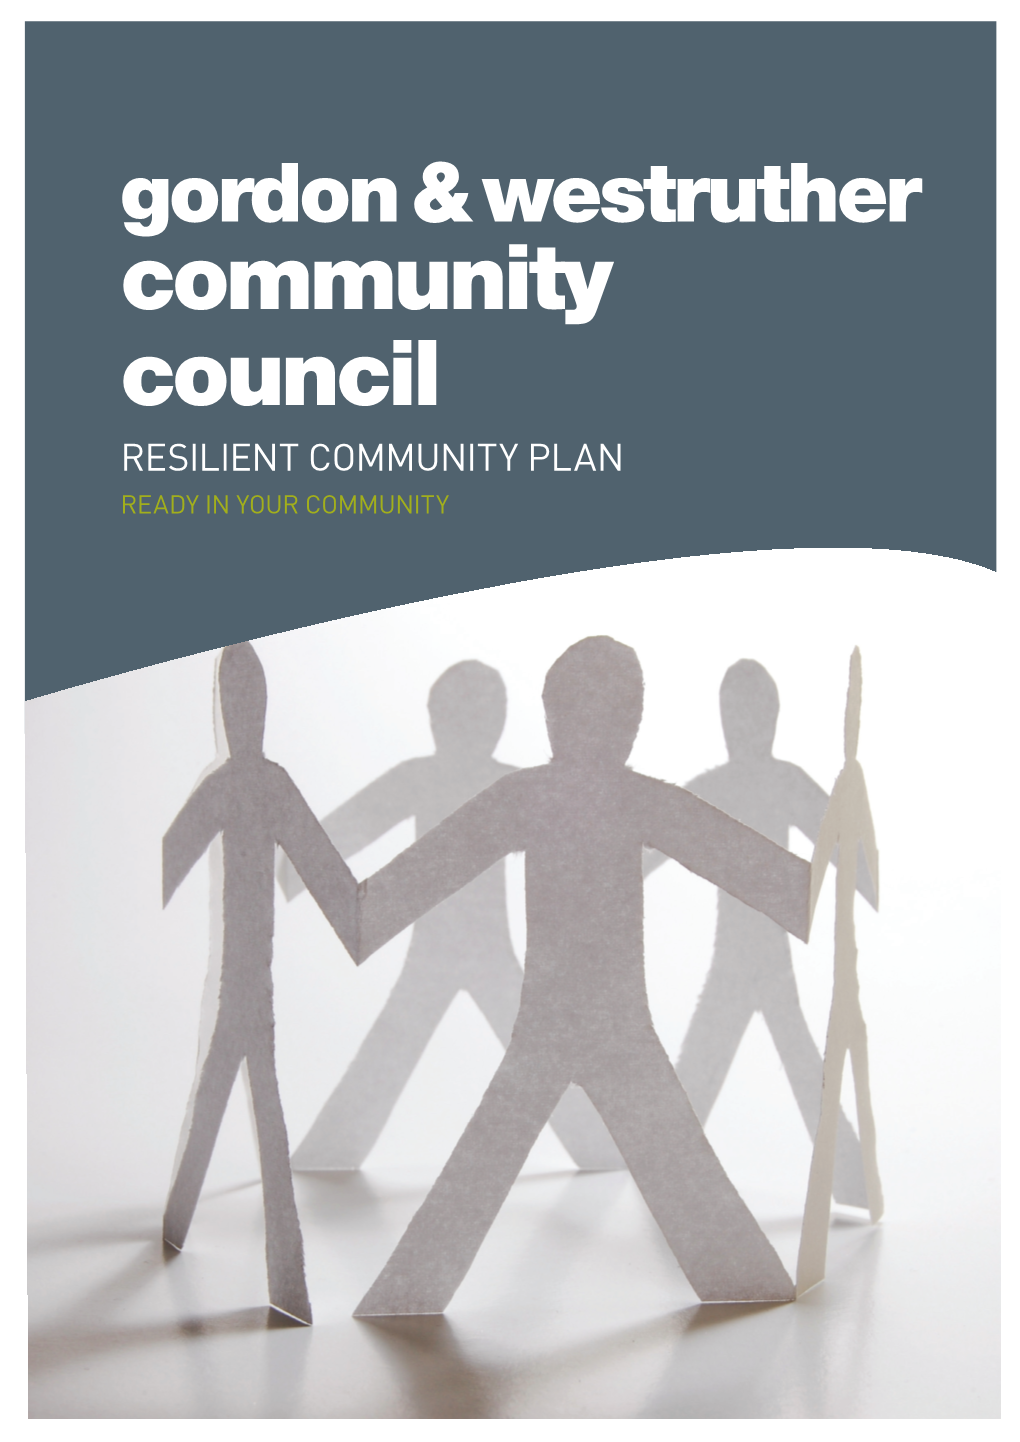 Community Council Resilient Community Plan Ready in Your Community Contents Gordon & Westruther Community Council